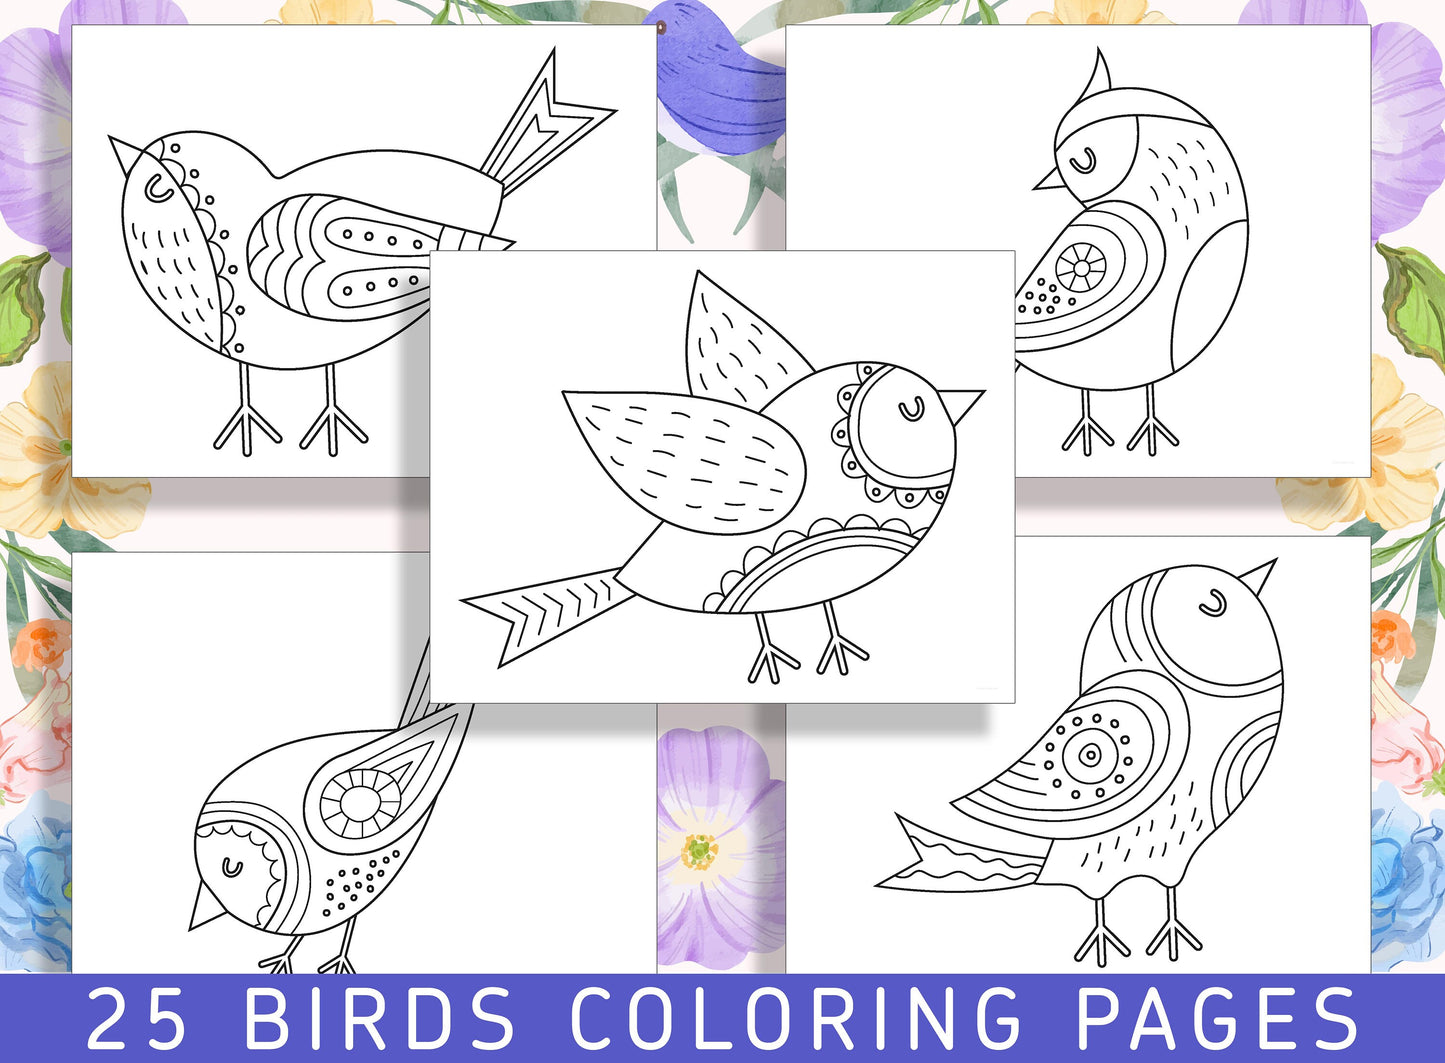 Colorful World of Birds: 25 Pages of Avian Beauty to Color, PDF File, Instant Download